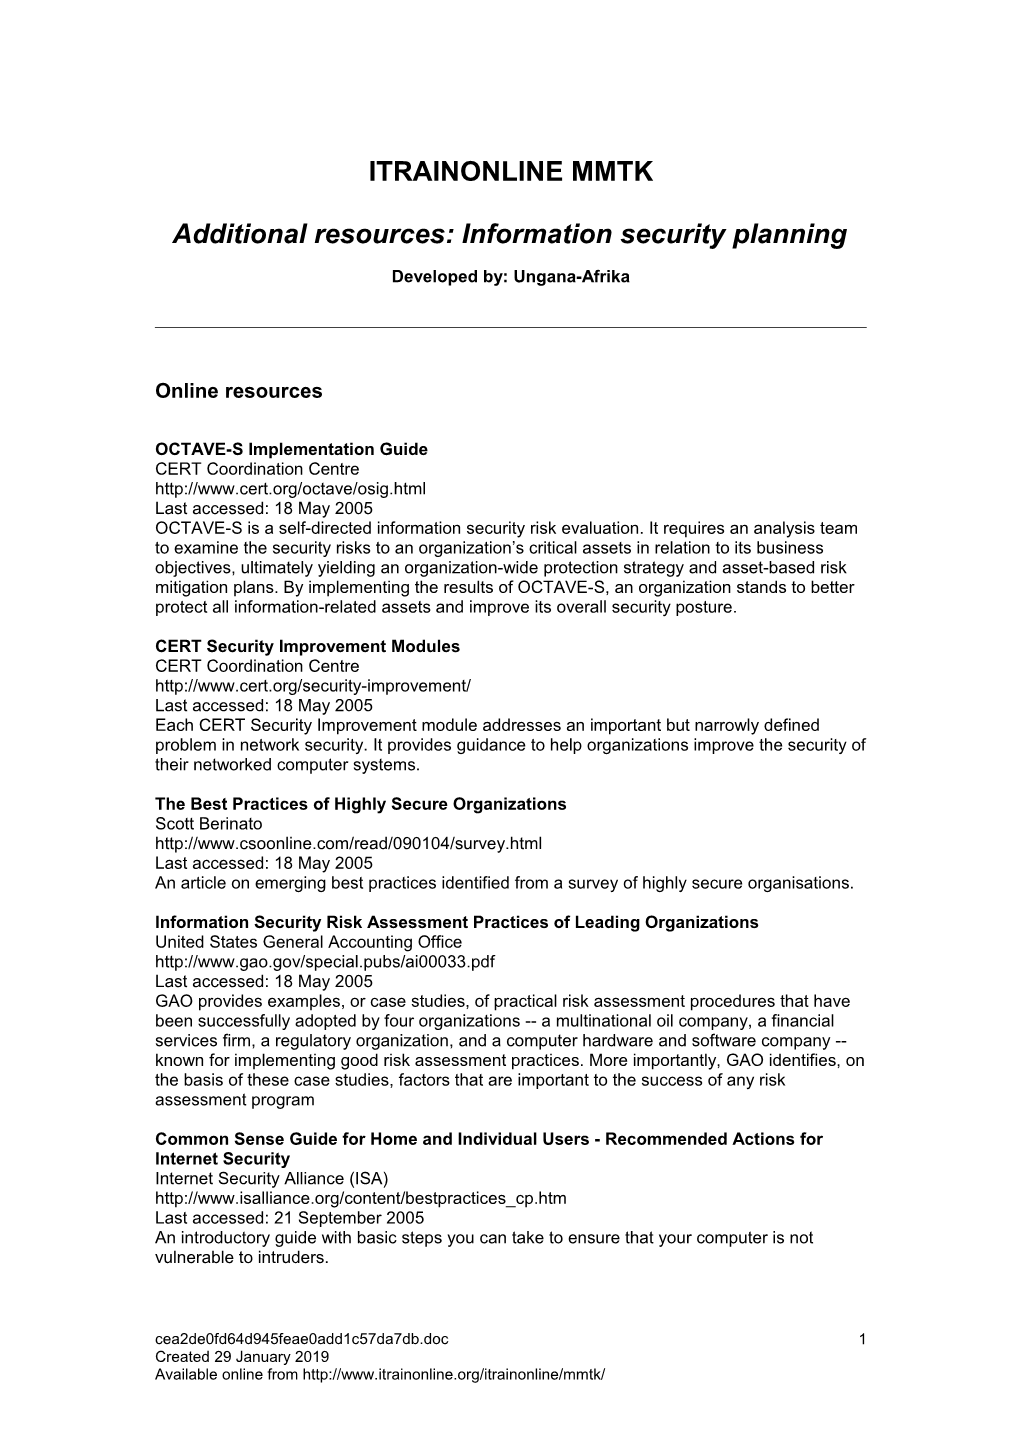 Additional Resources: Information Security Planning